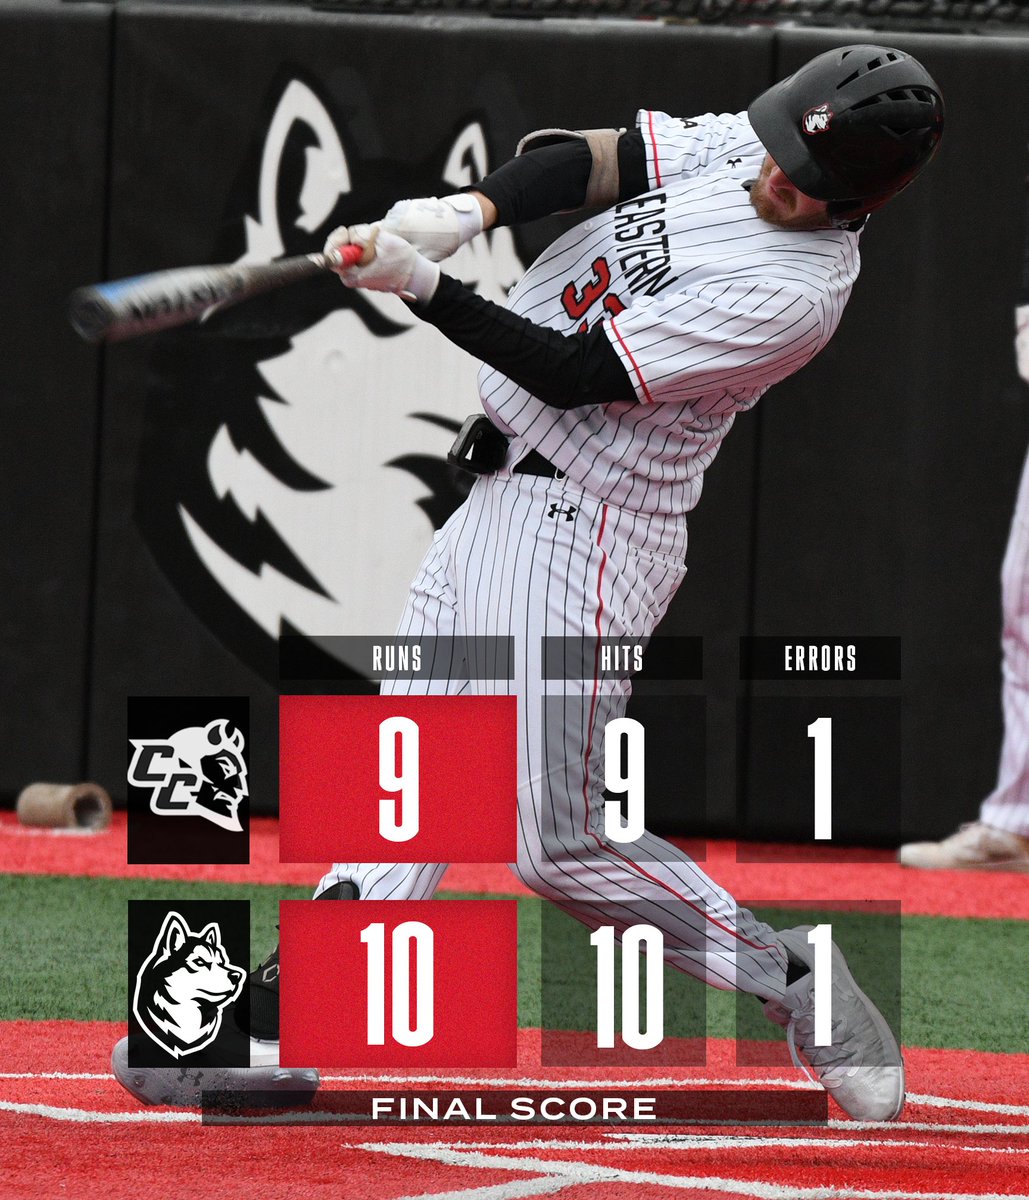 Second walk off win at Friedman this season! W: Bowery (2-0) MacGregor: 3-for-5, 2B Lane: 1-for-2, HR, 4 RBI Beckstein: 1-for-3, HR, RBI Doyle: 1-for-4, 2B, 3 RBI